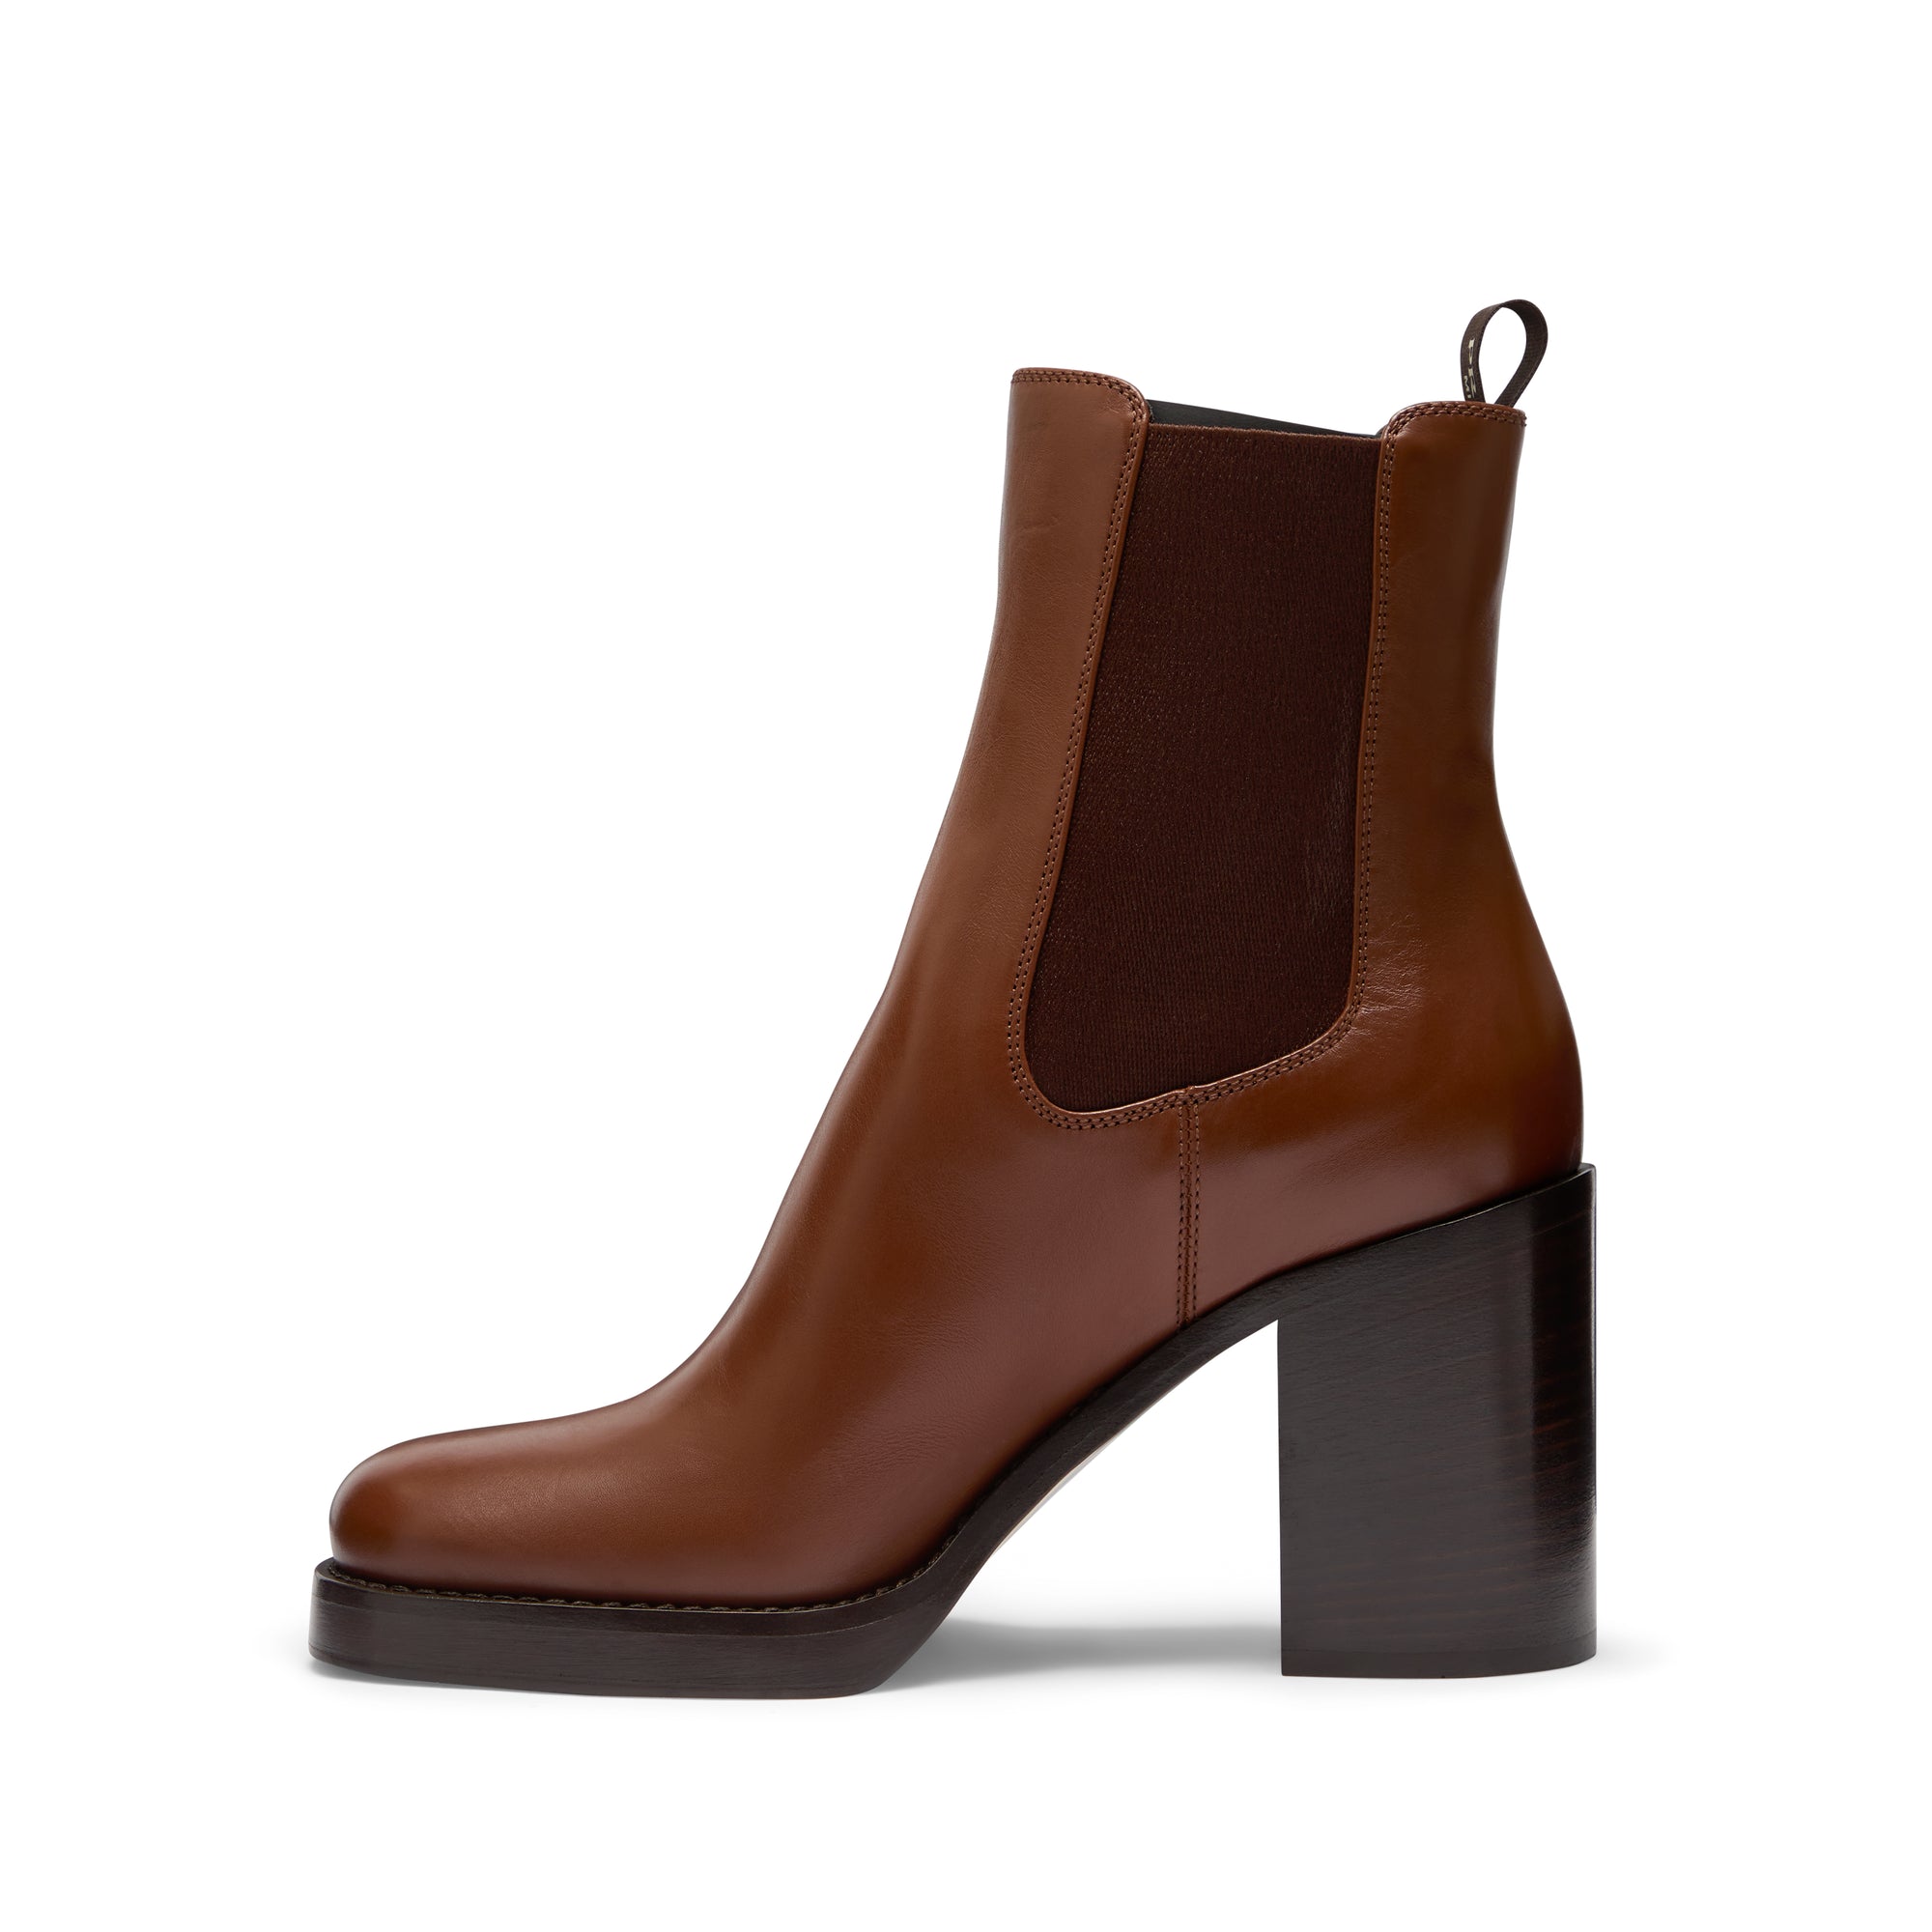 Prada - Women’s Leather Ankle Boots - (Cognac) view 3